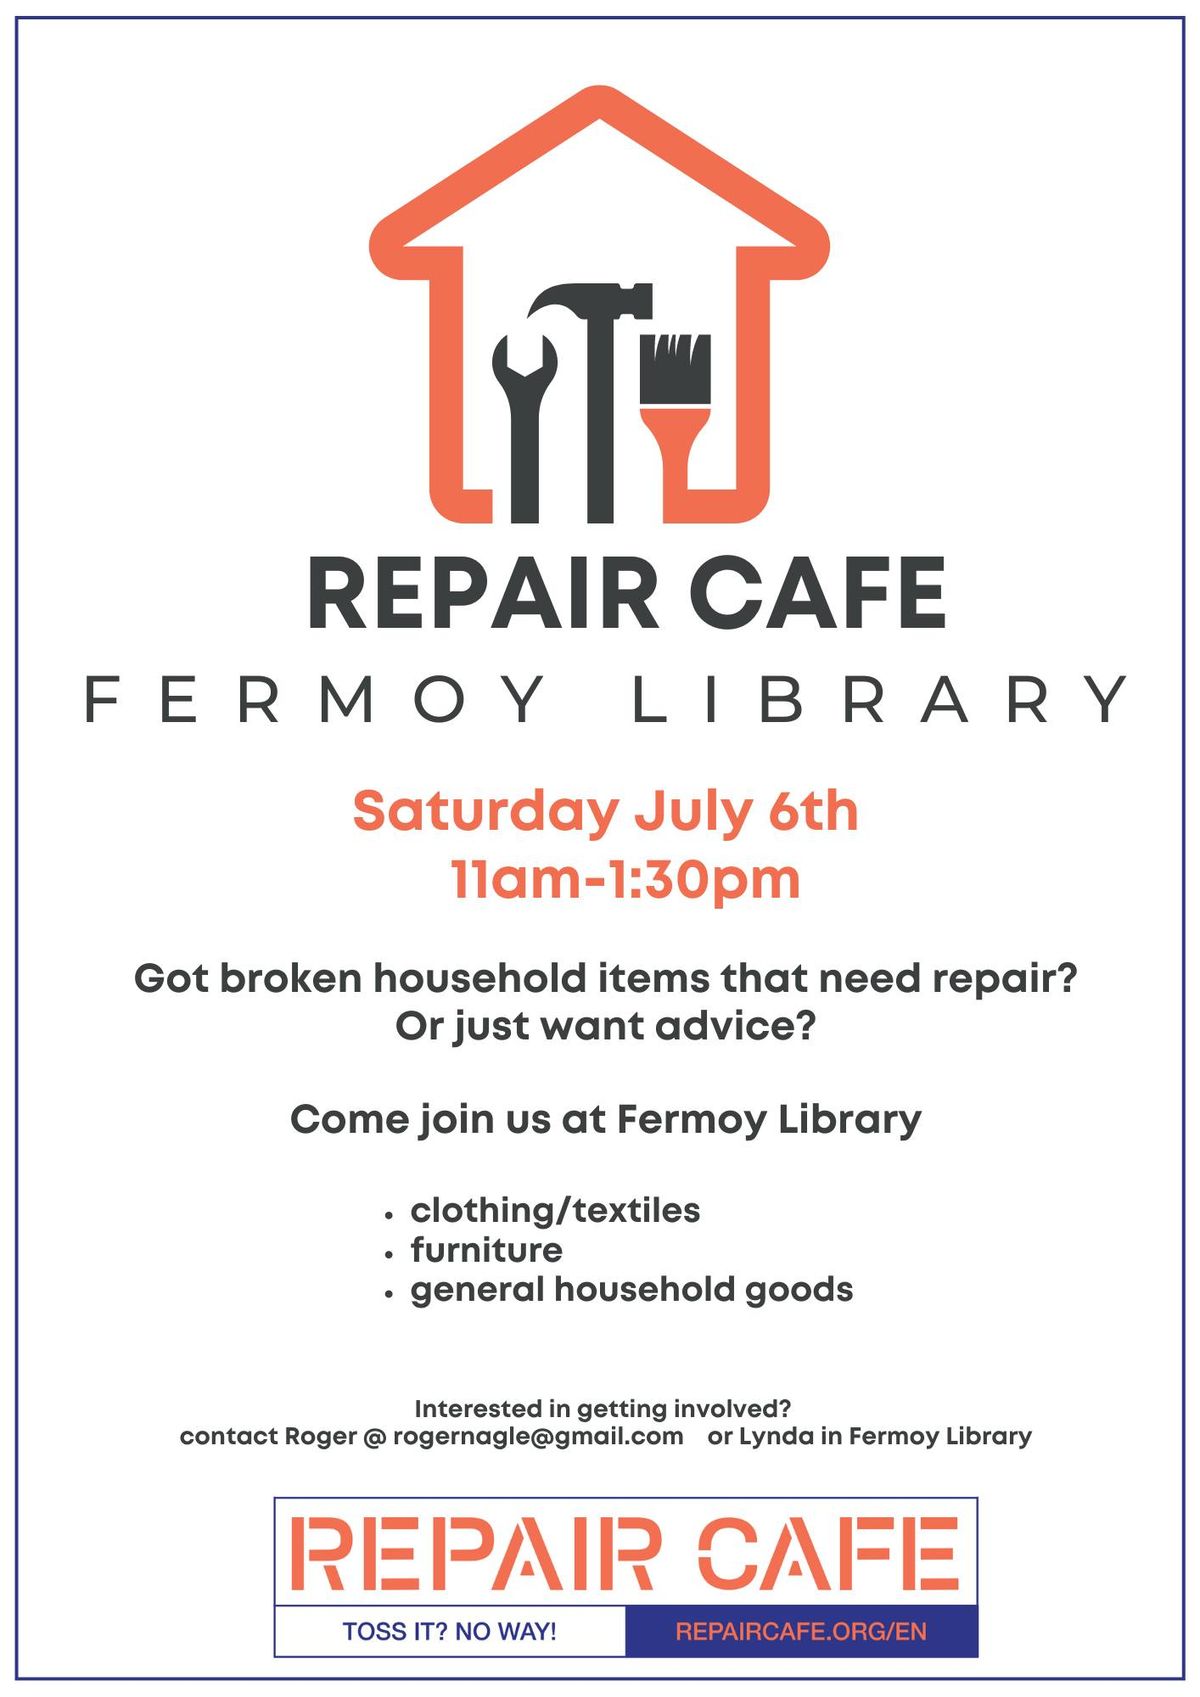 Fermoy Library Repair Cafe